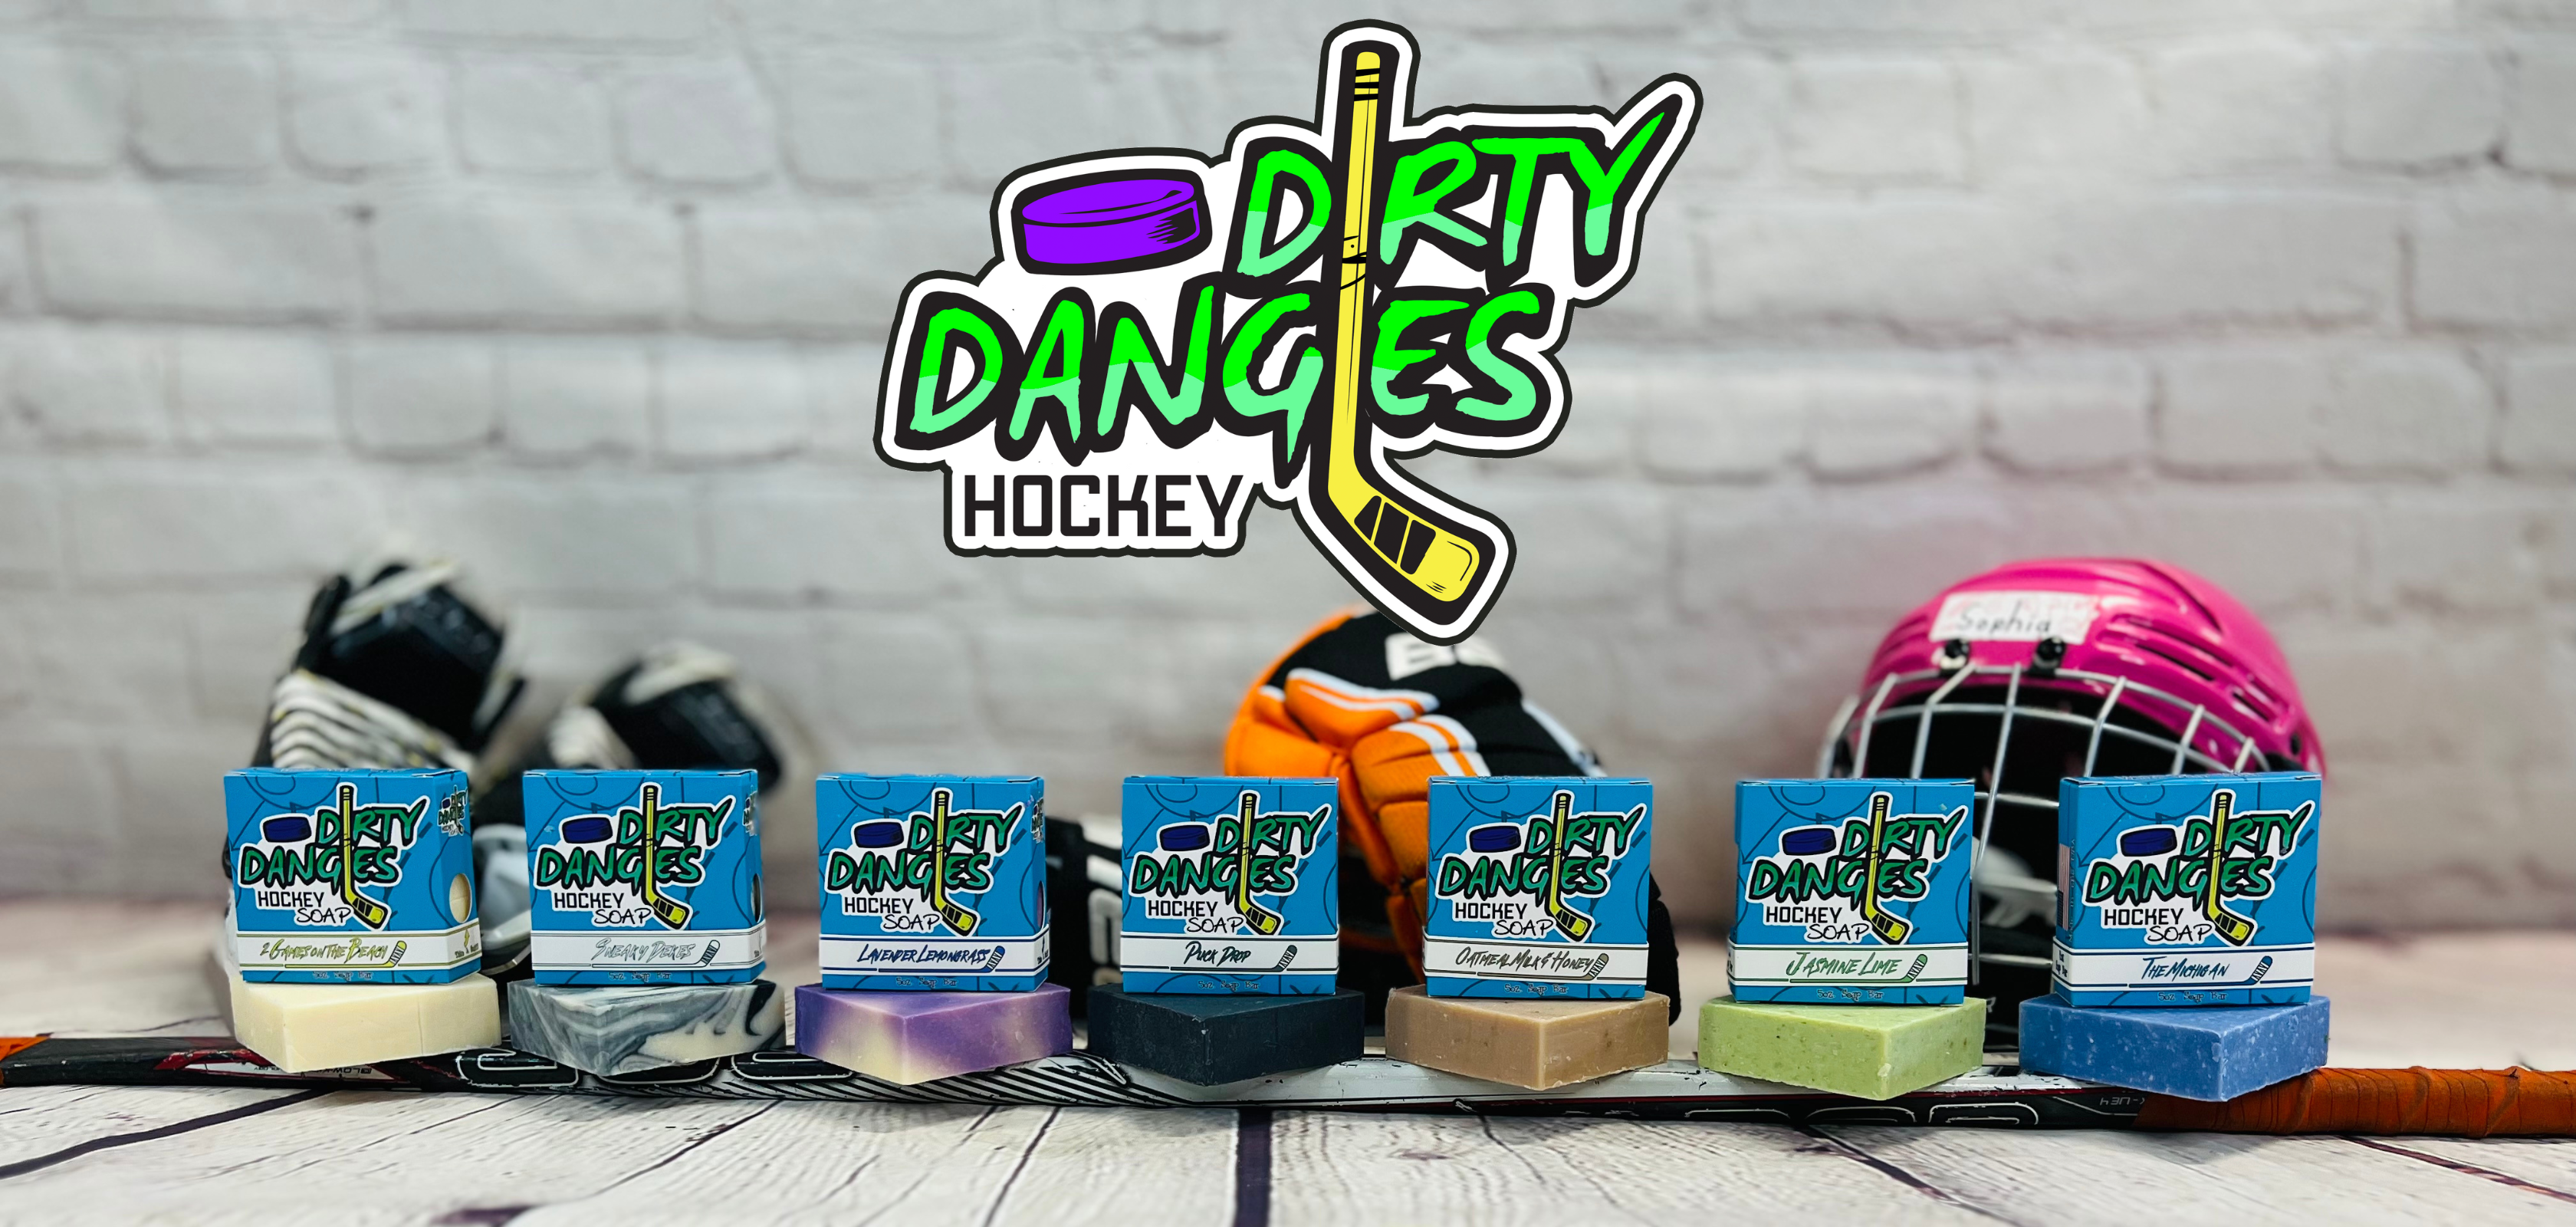 7 dirty dangles hockey soap bars sit on a hockey stick with hockey equipment in the background.